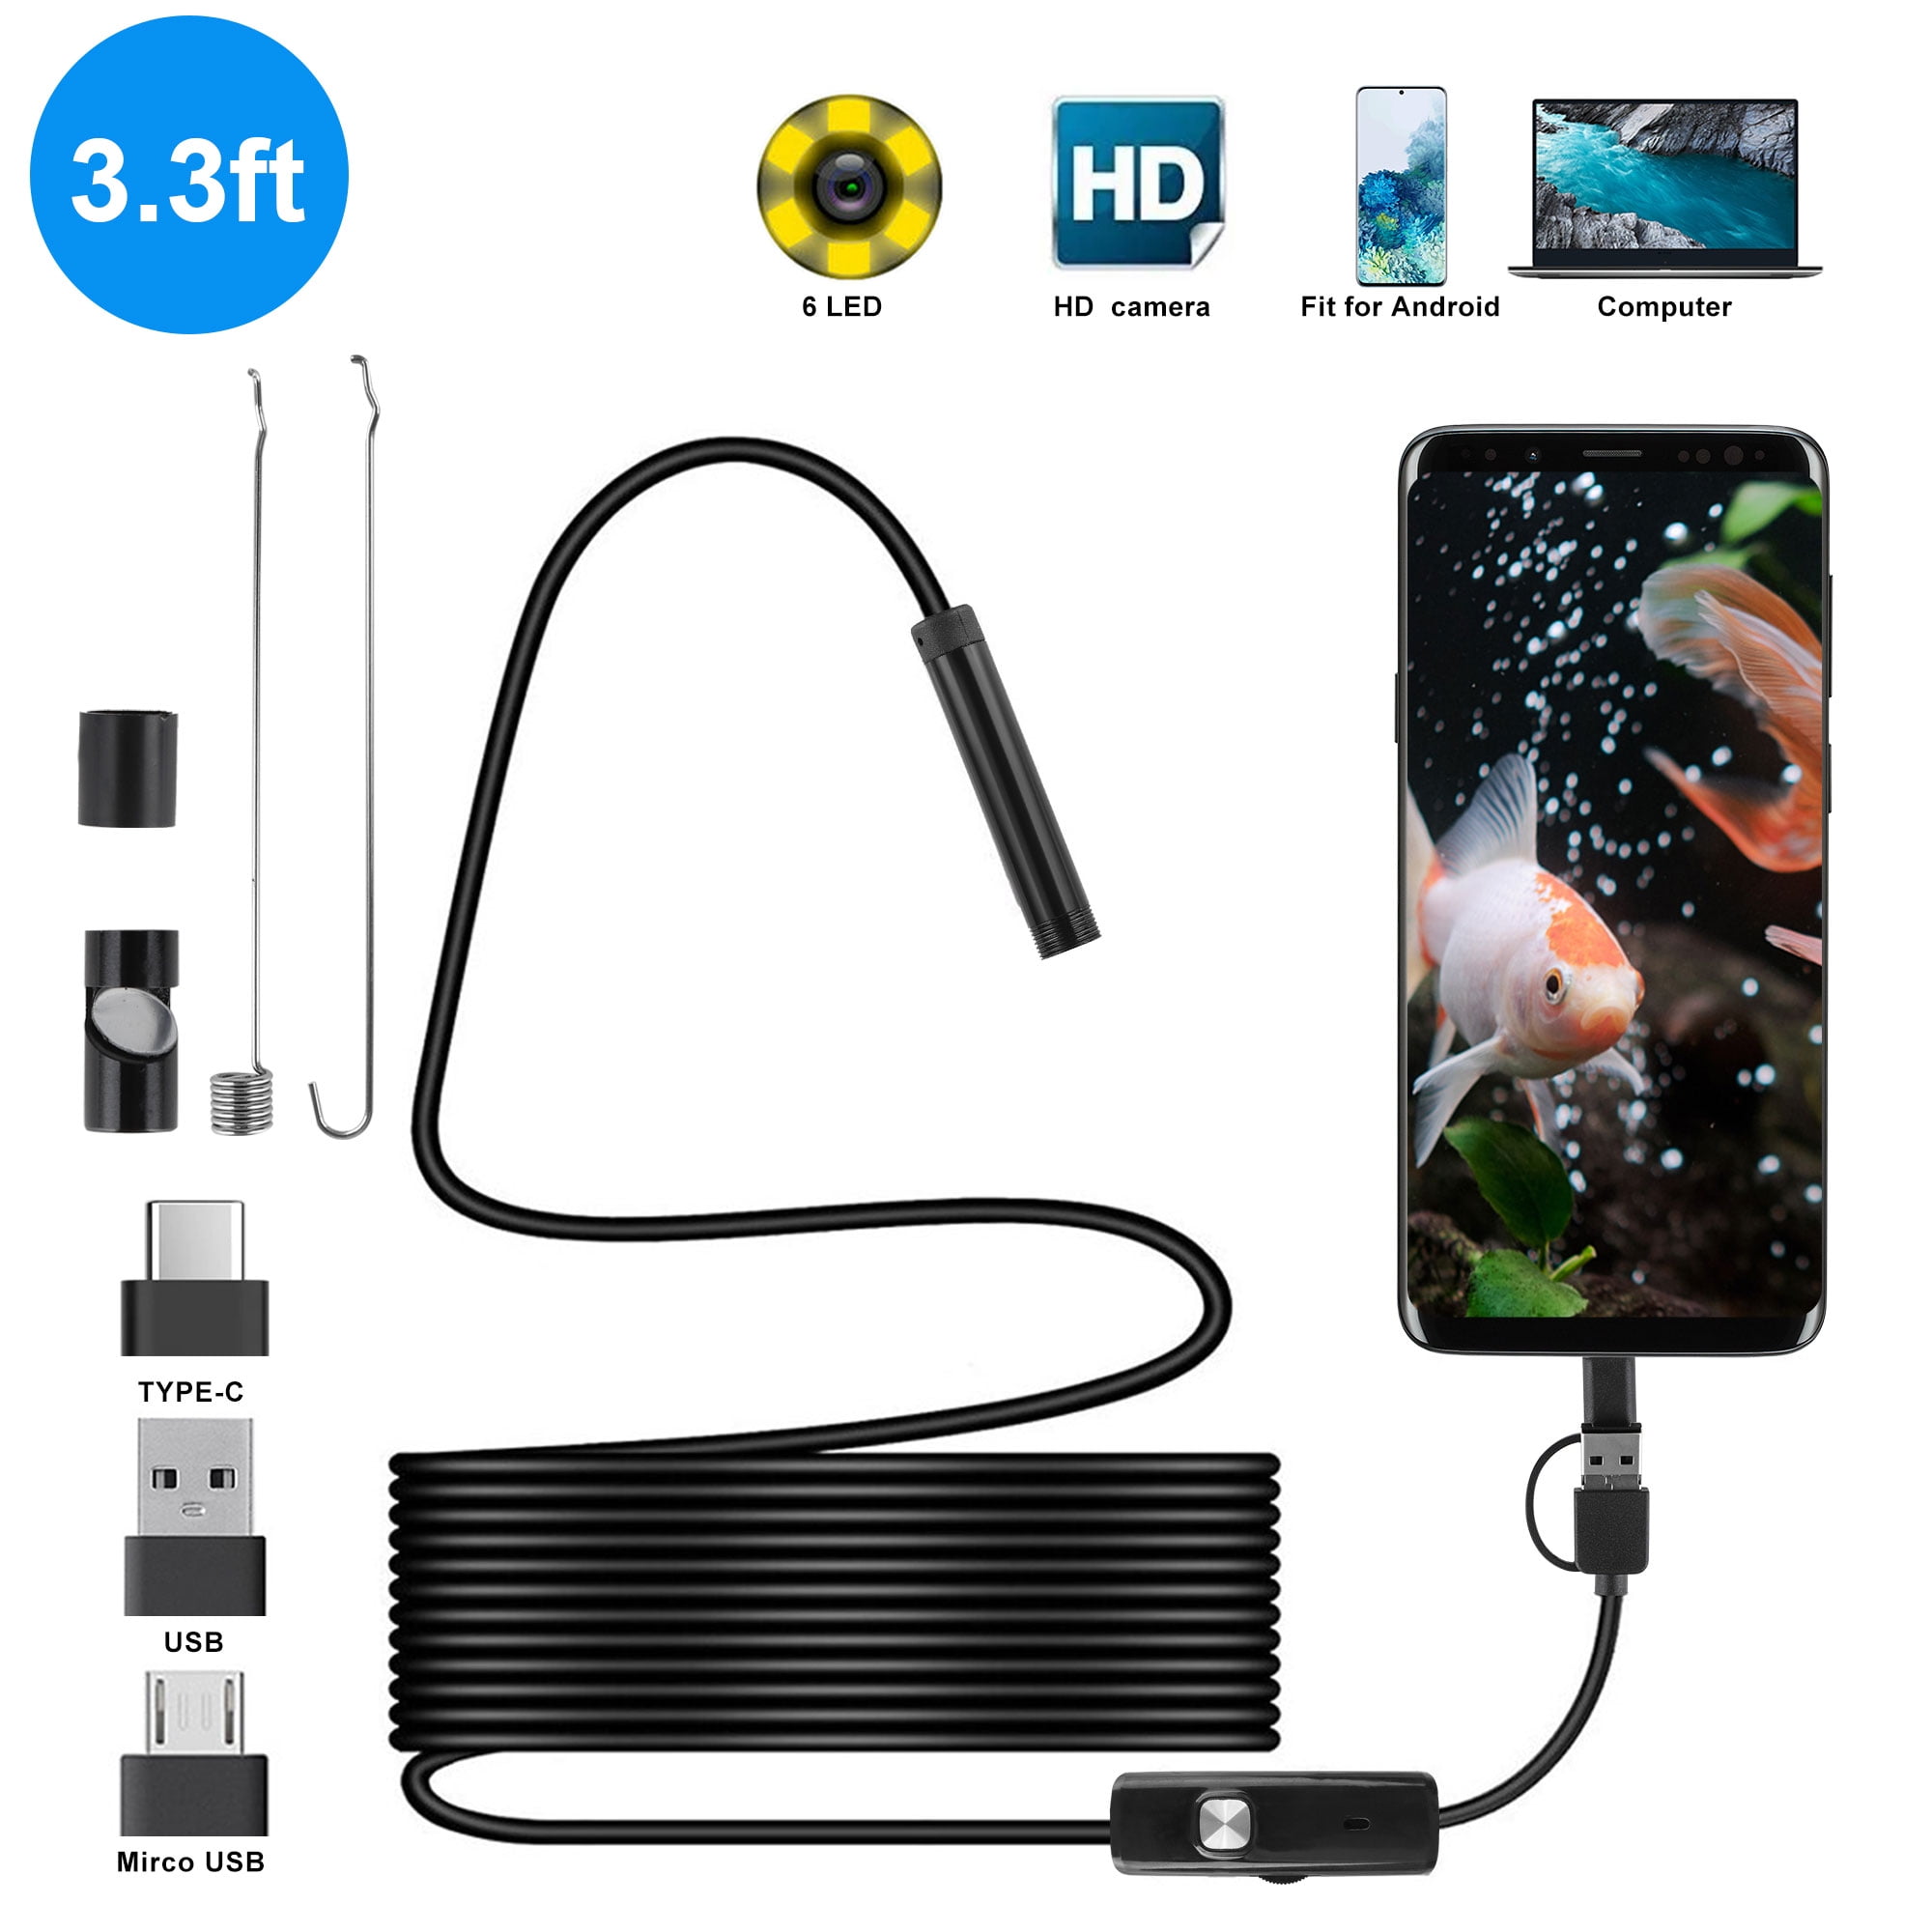 TSV 3.3ft USB Endoscope, Snake Inspection Camera, Waterproof Borescope,  Type-C Scope Camera with 6 LED Lights, Compatible with Android System 